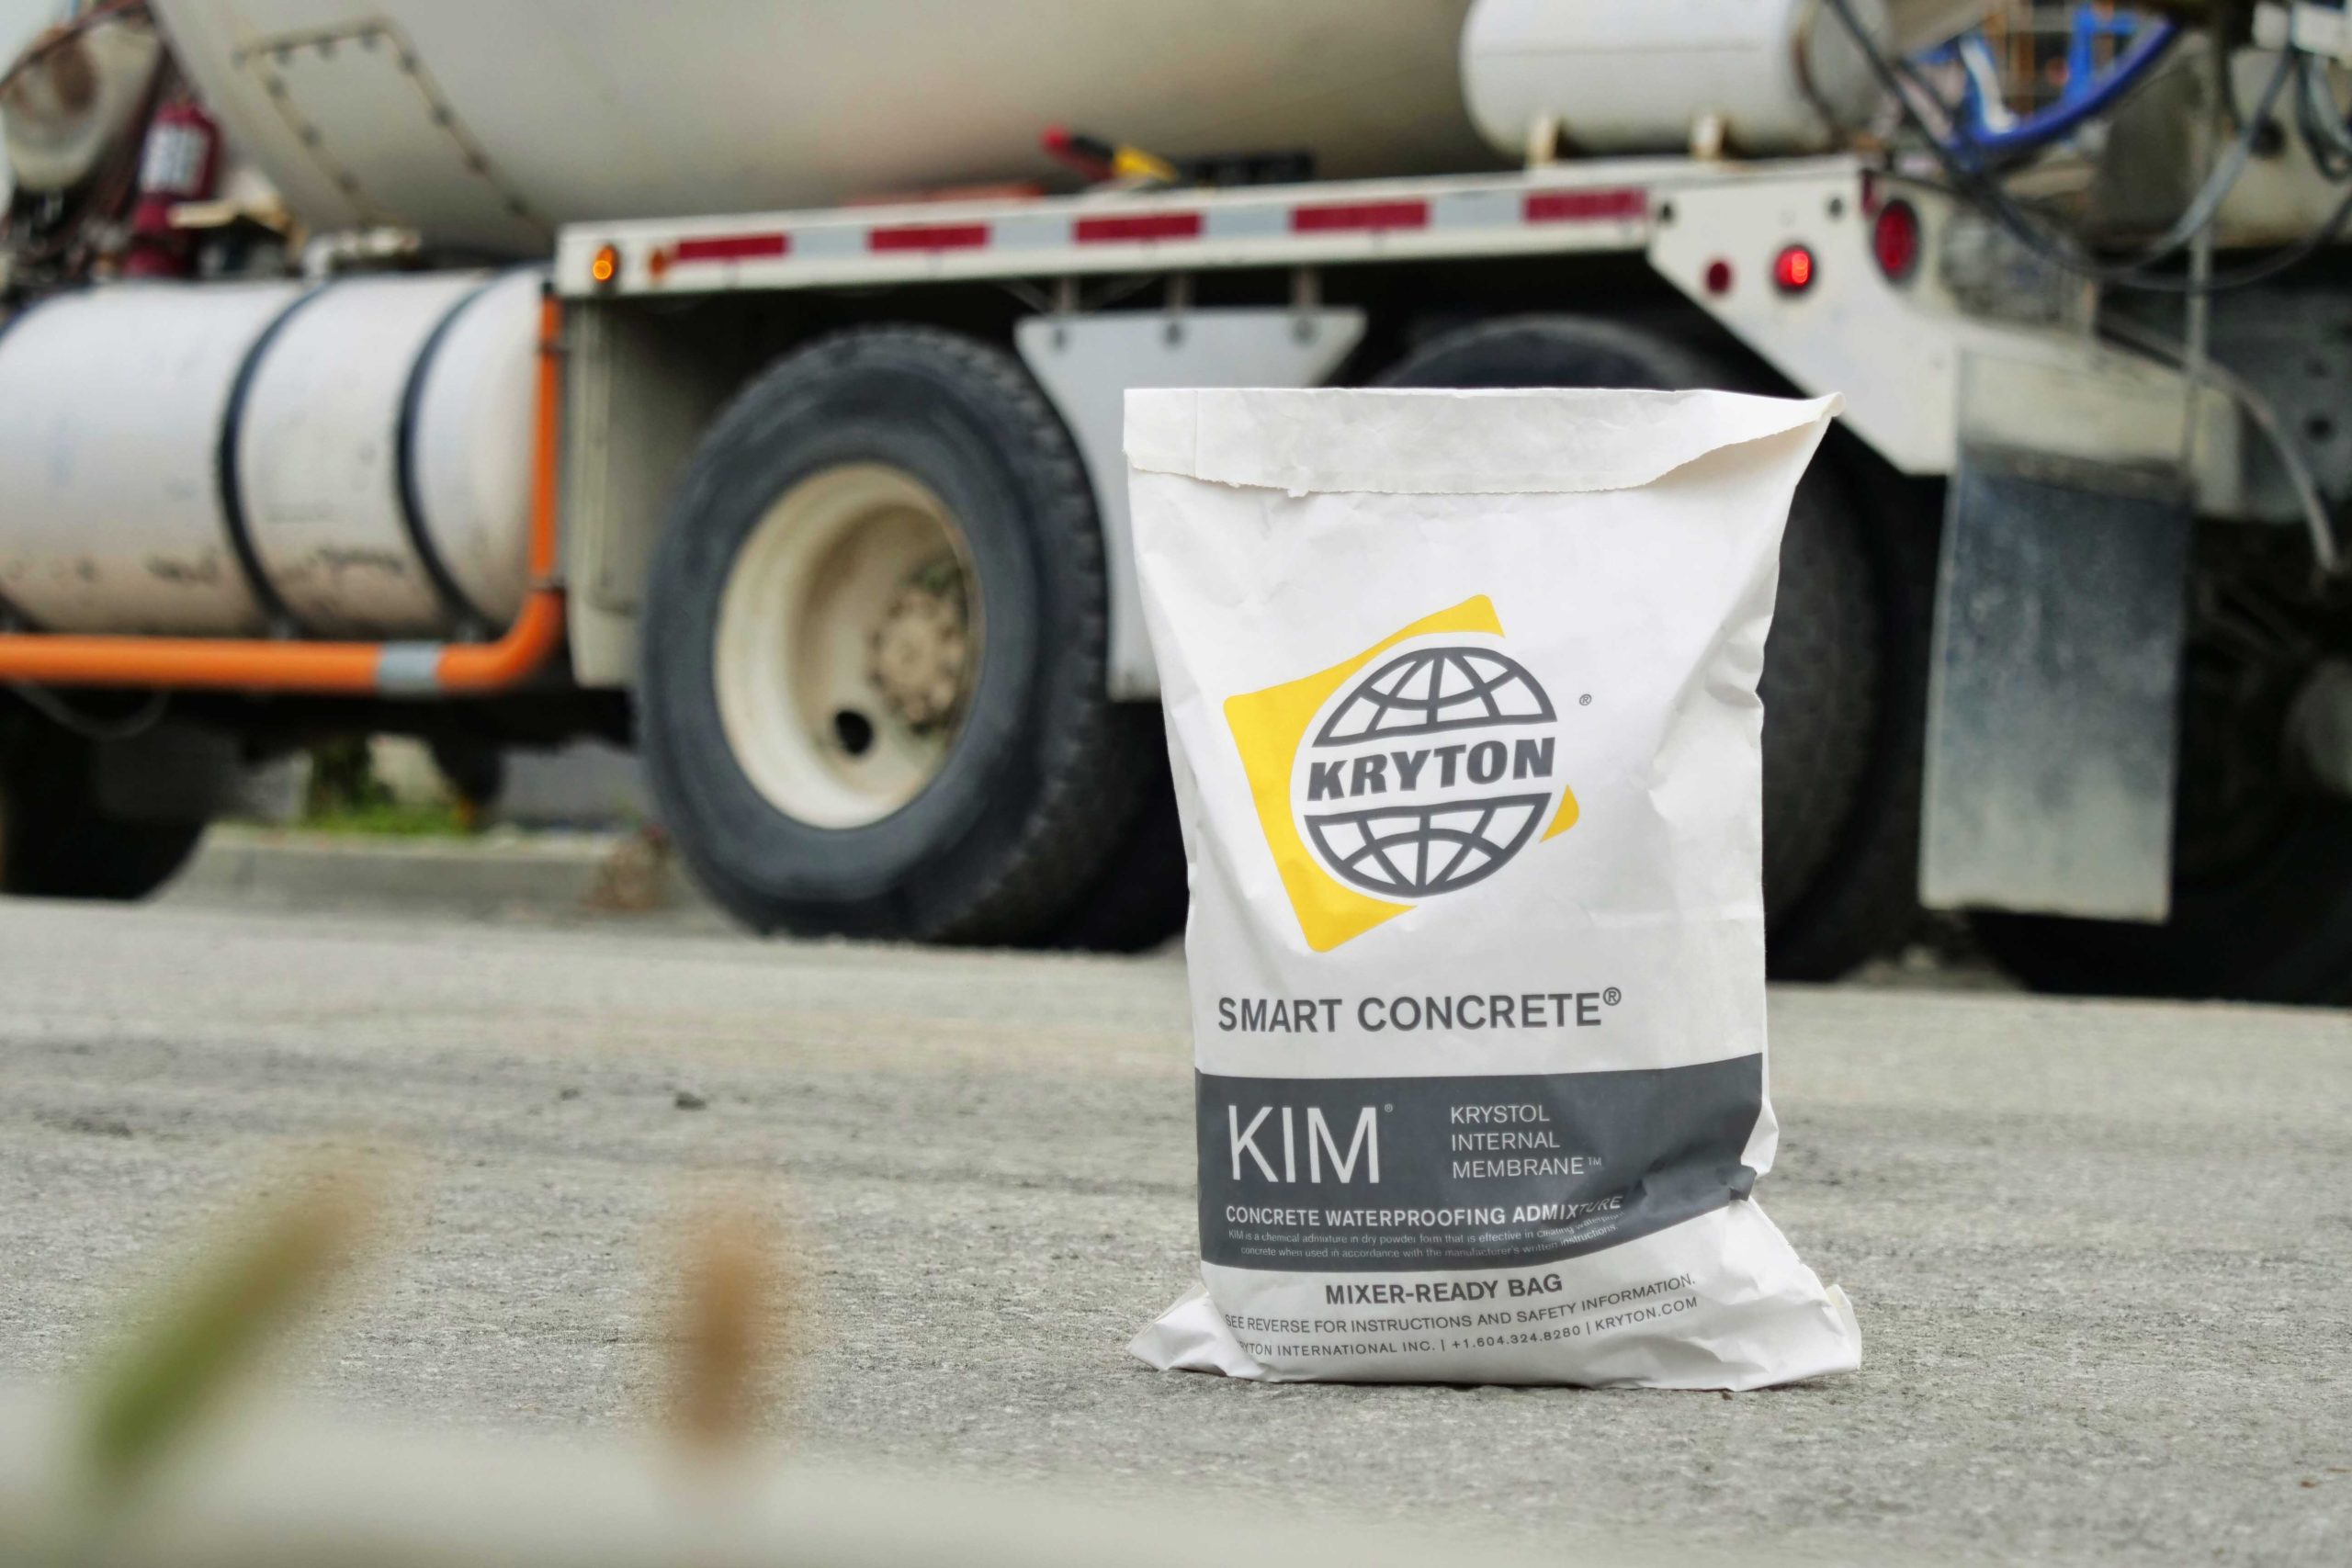 A bag of KIM is sitting on some pavement with a bit of grass poking out in the foreground and parts of a ready-mix truck parked nearby in the background.